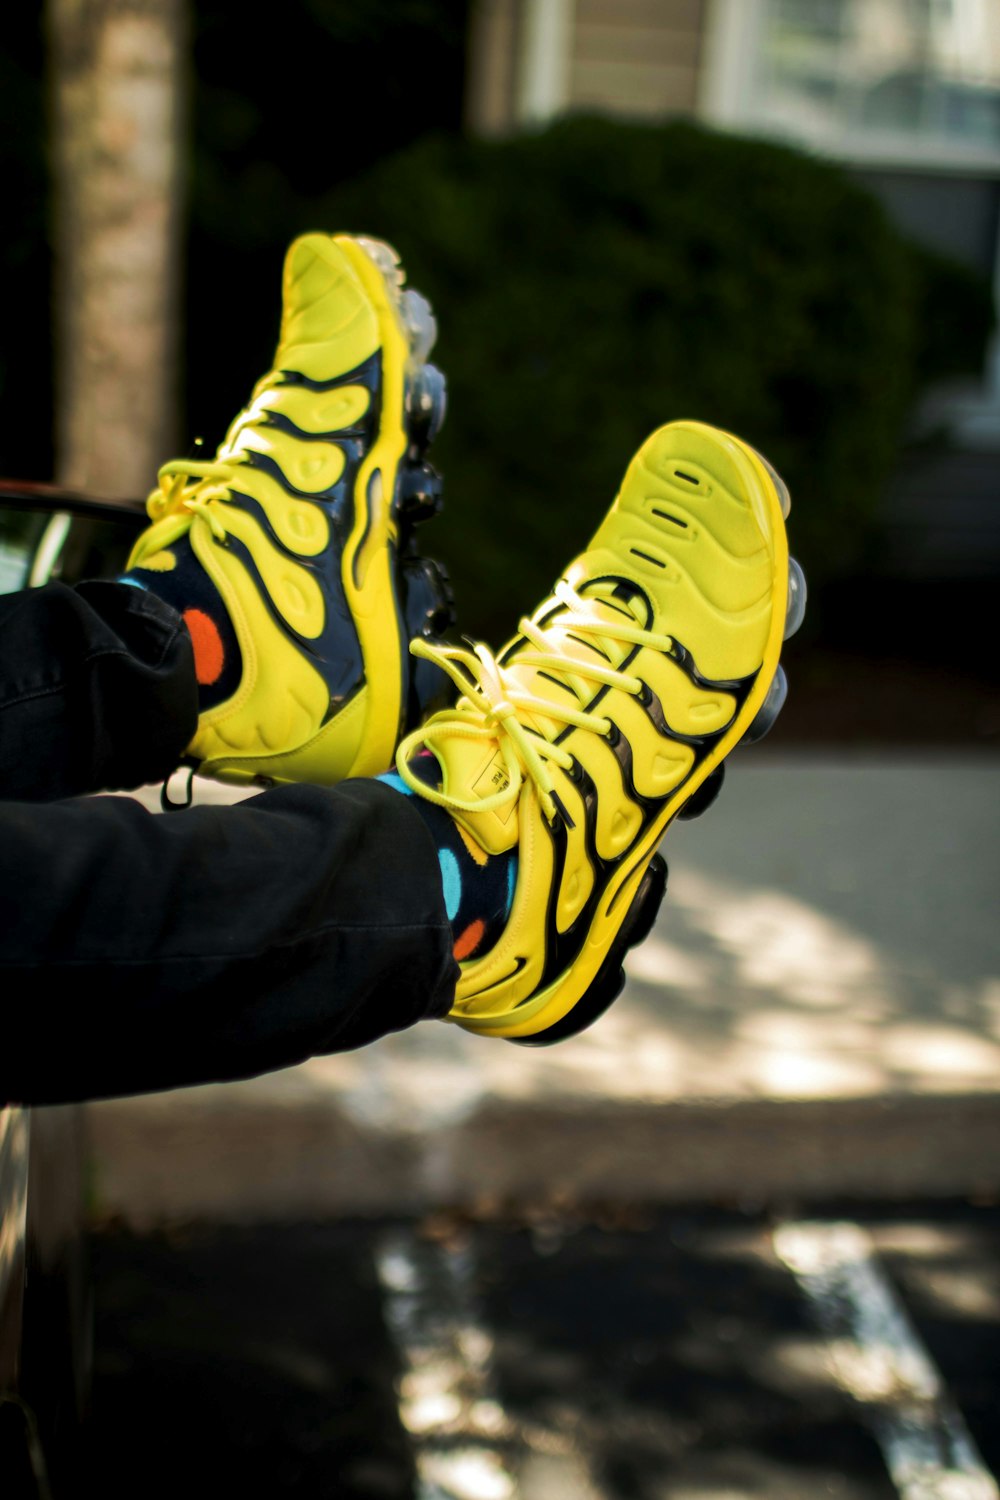 person wearing yellow-and-black Nike basketball shoes